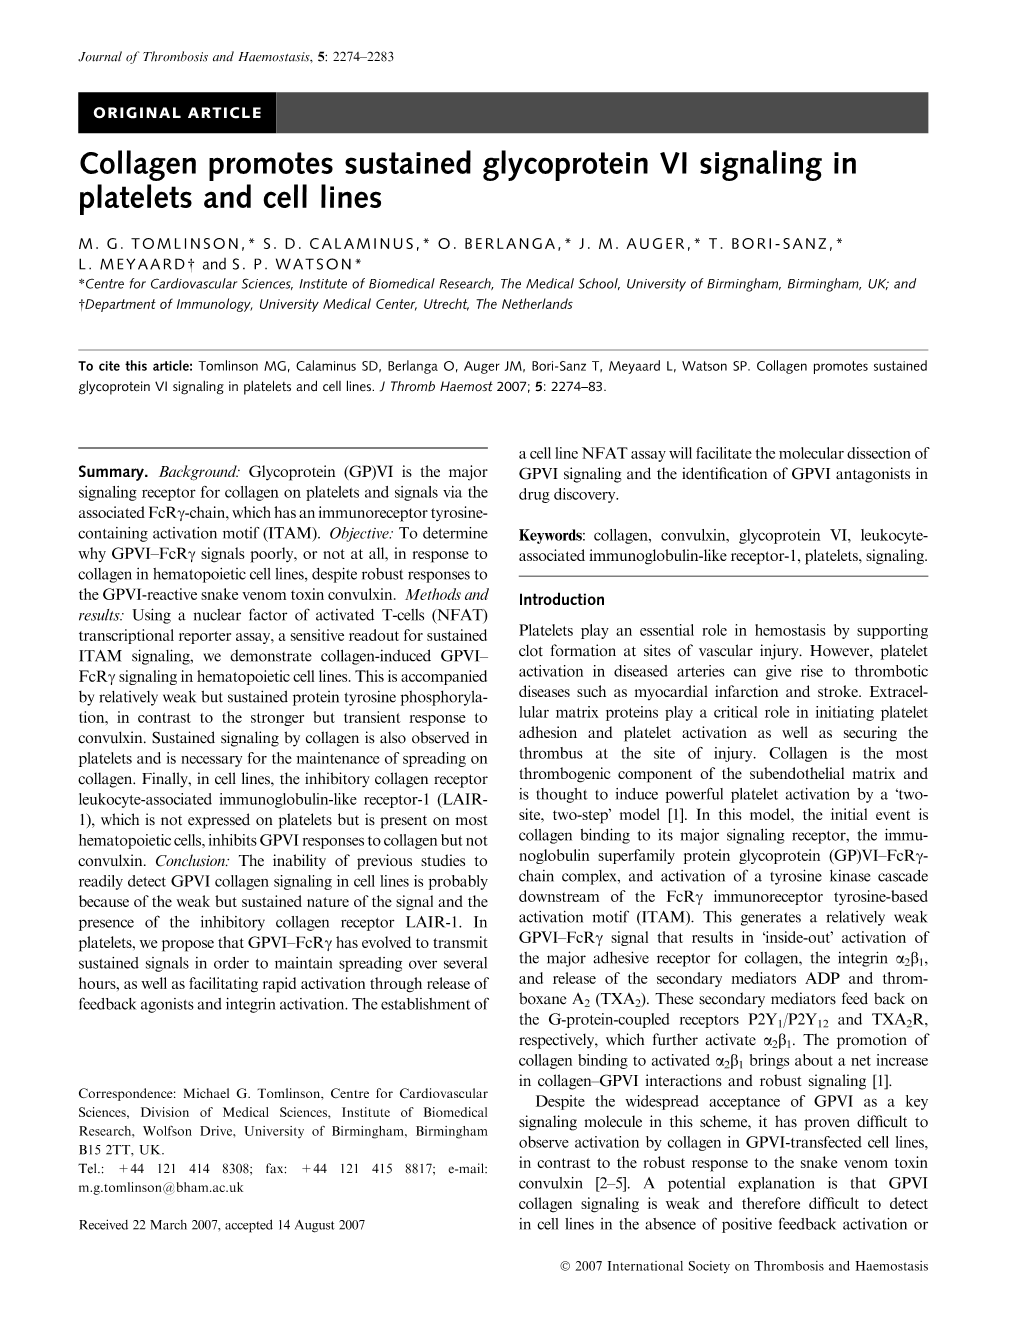 Collagen Promotes Sustained Glycoprotein VI Signaling in Platelets and Cell Lines